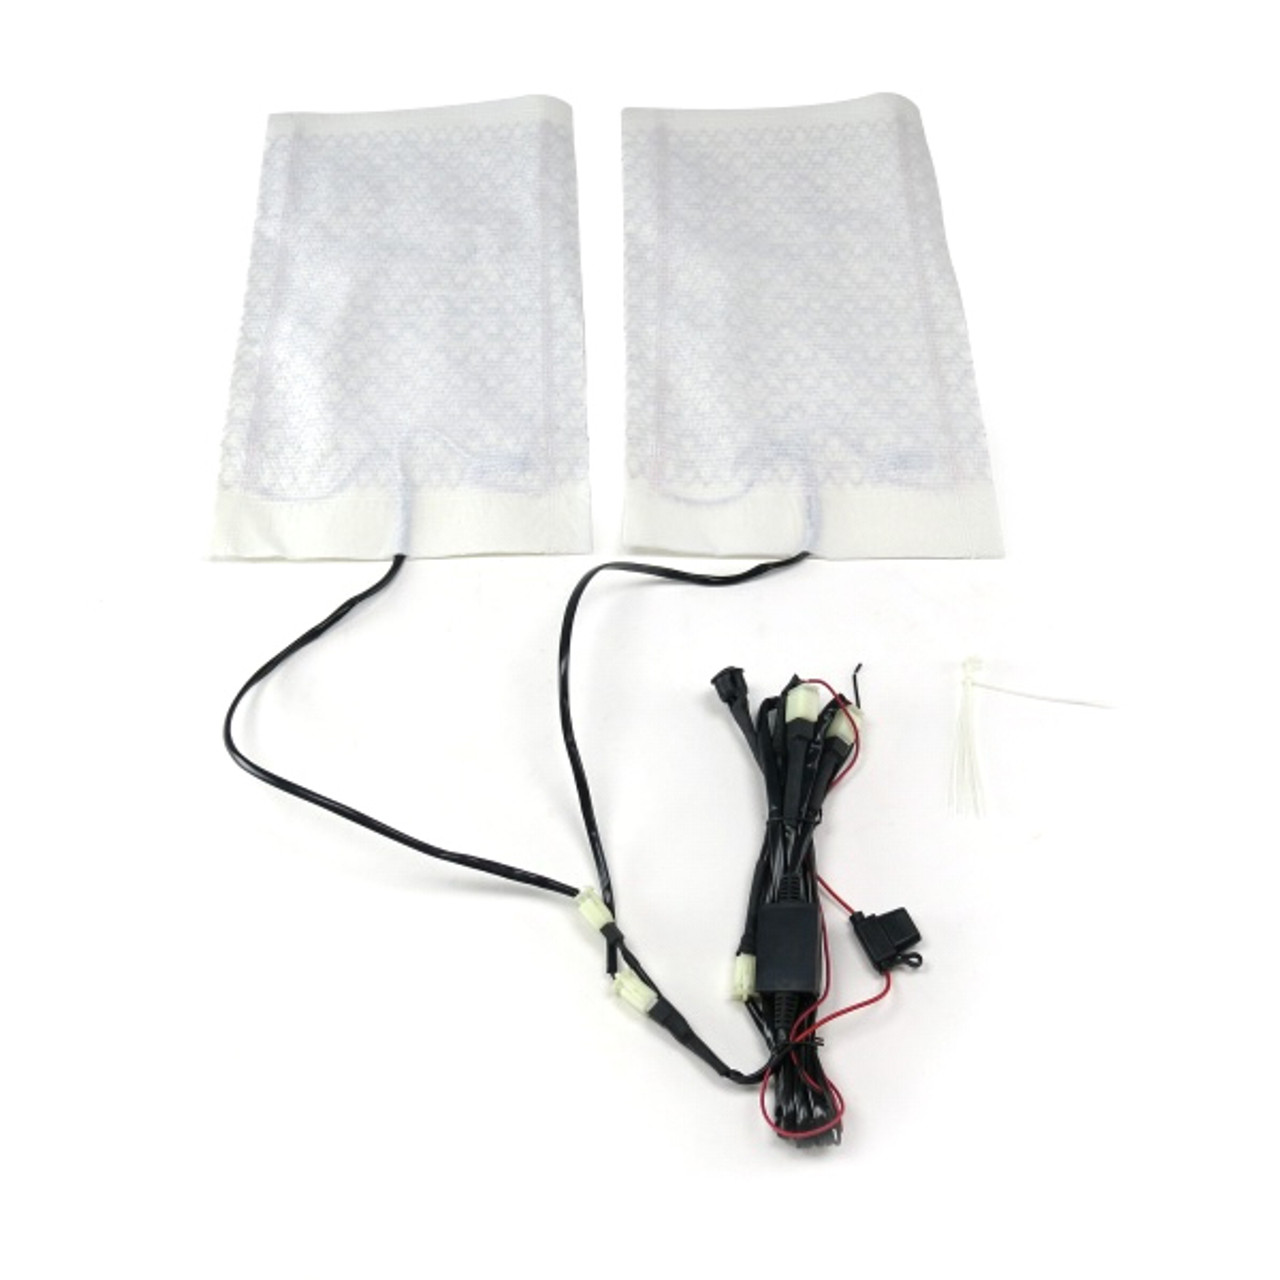 Carbon Fiber Heated Seat Kit with Switch and Plug